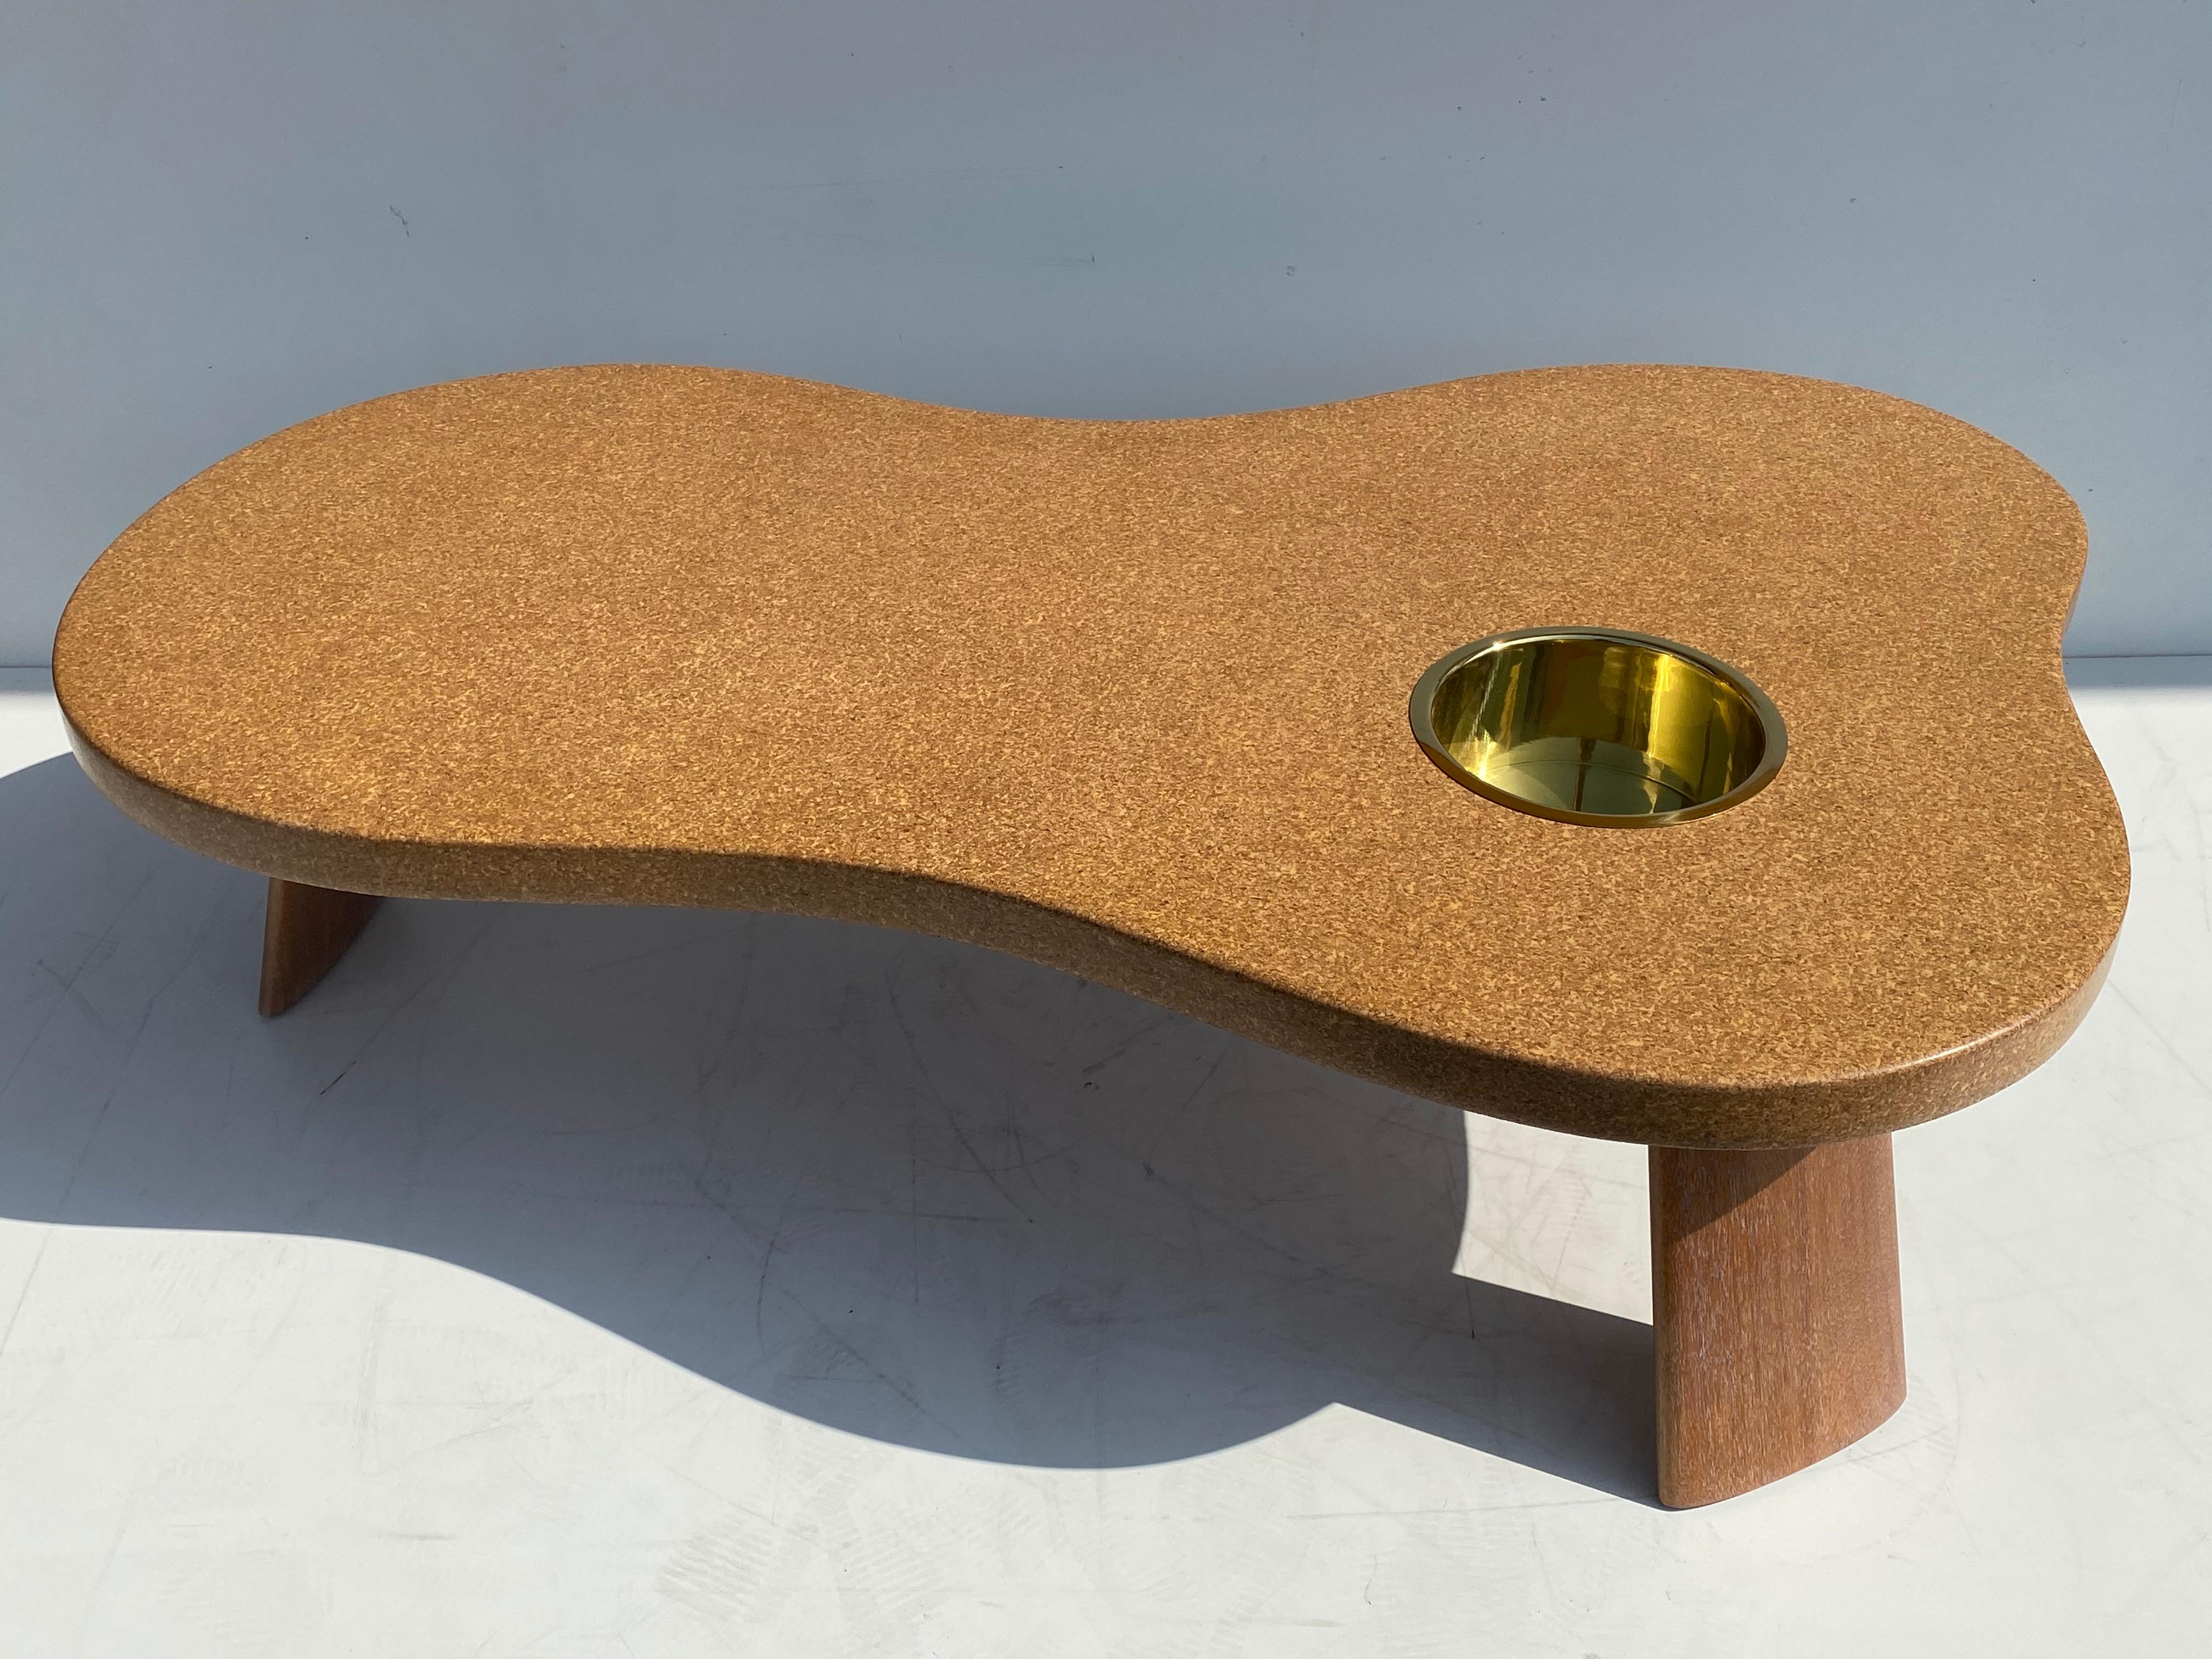 Lacquered Organic Shape Cork and Mahogany Coffee Table with Planter